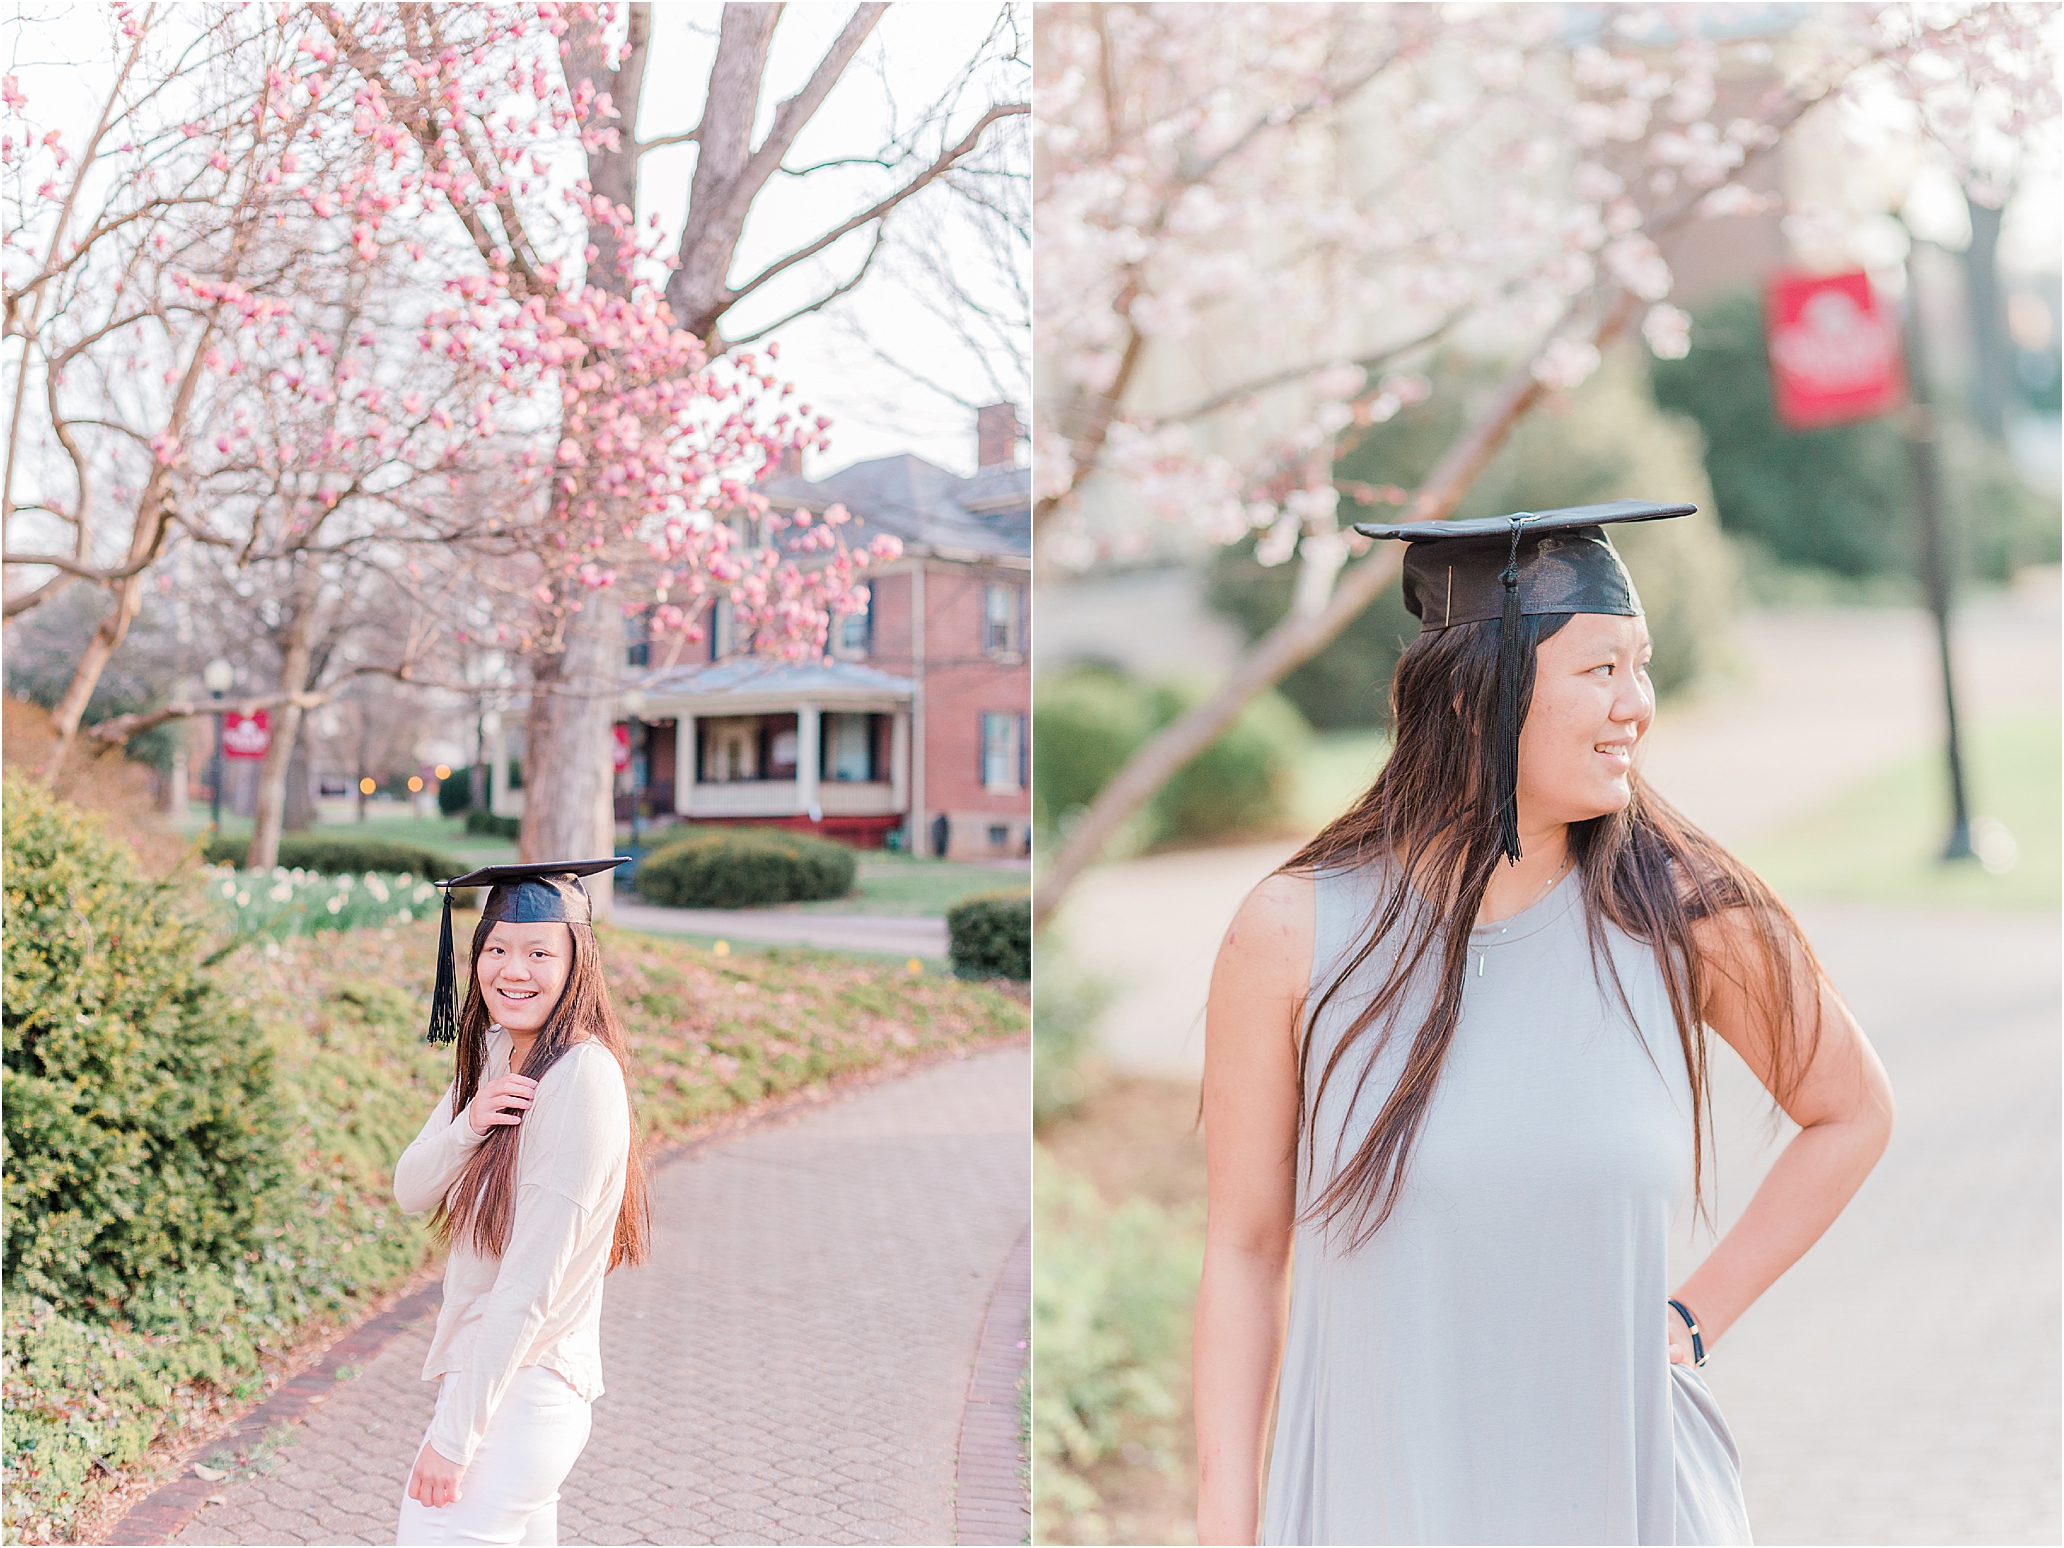 A spring graduation session in Virginia.